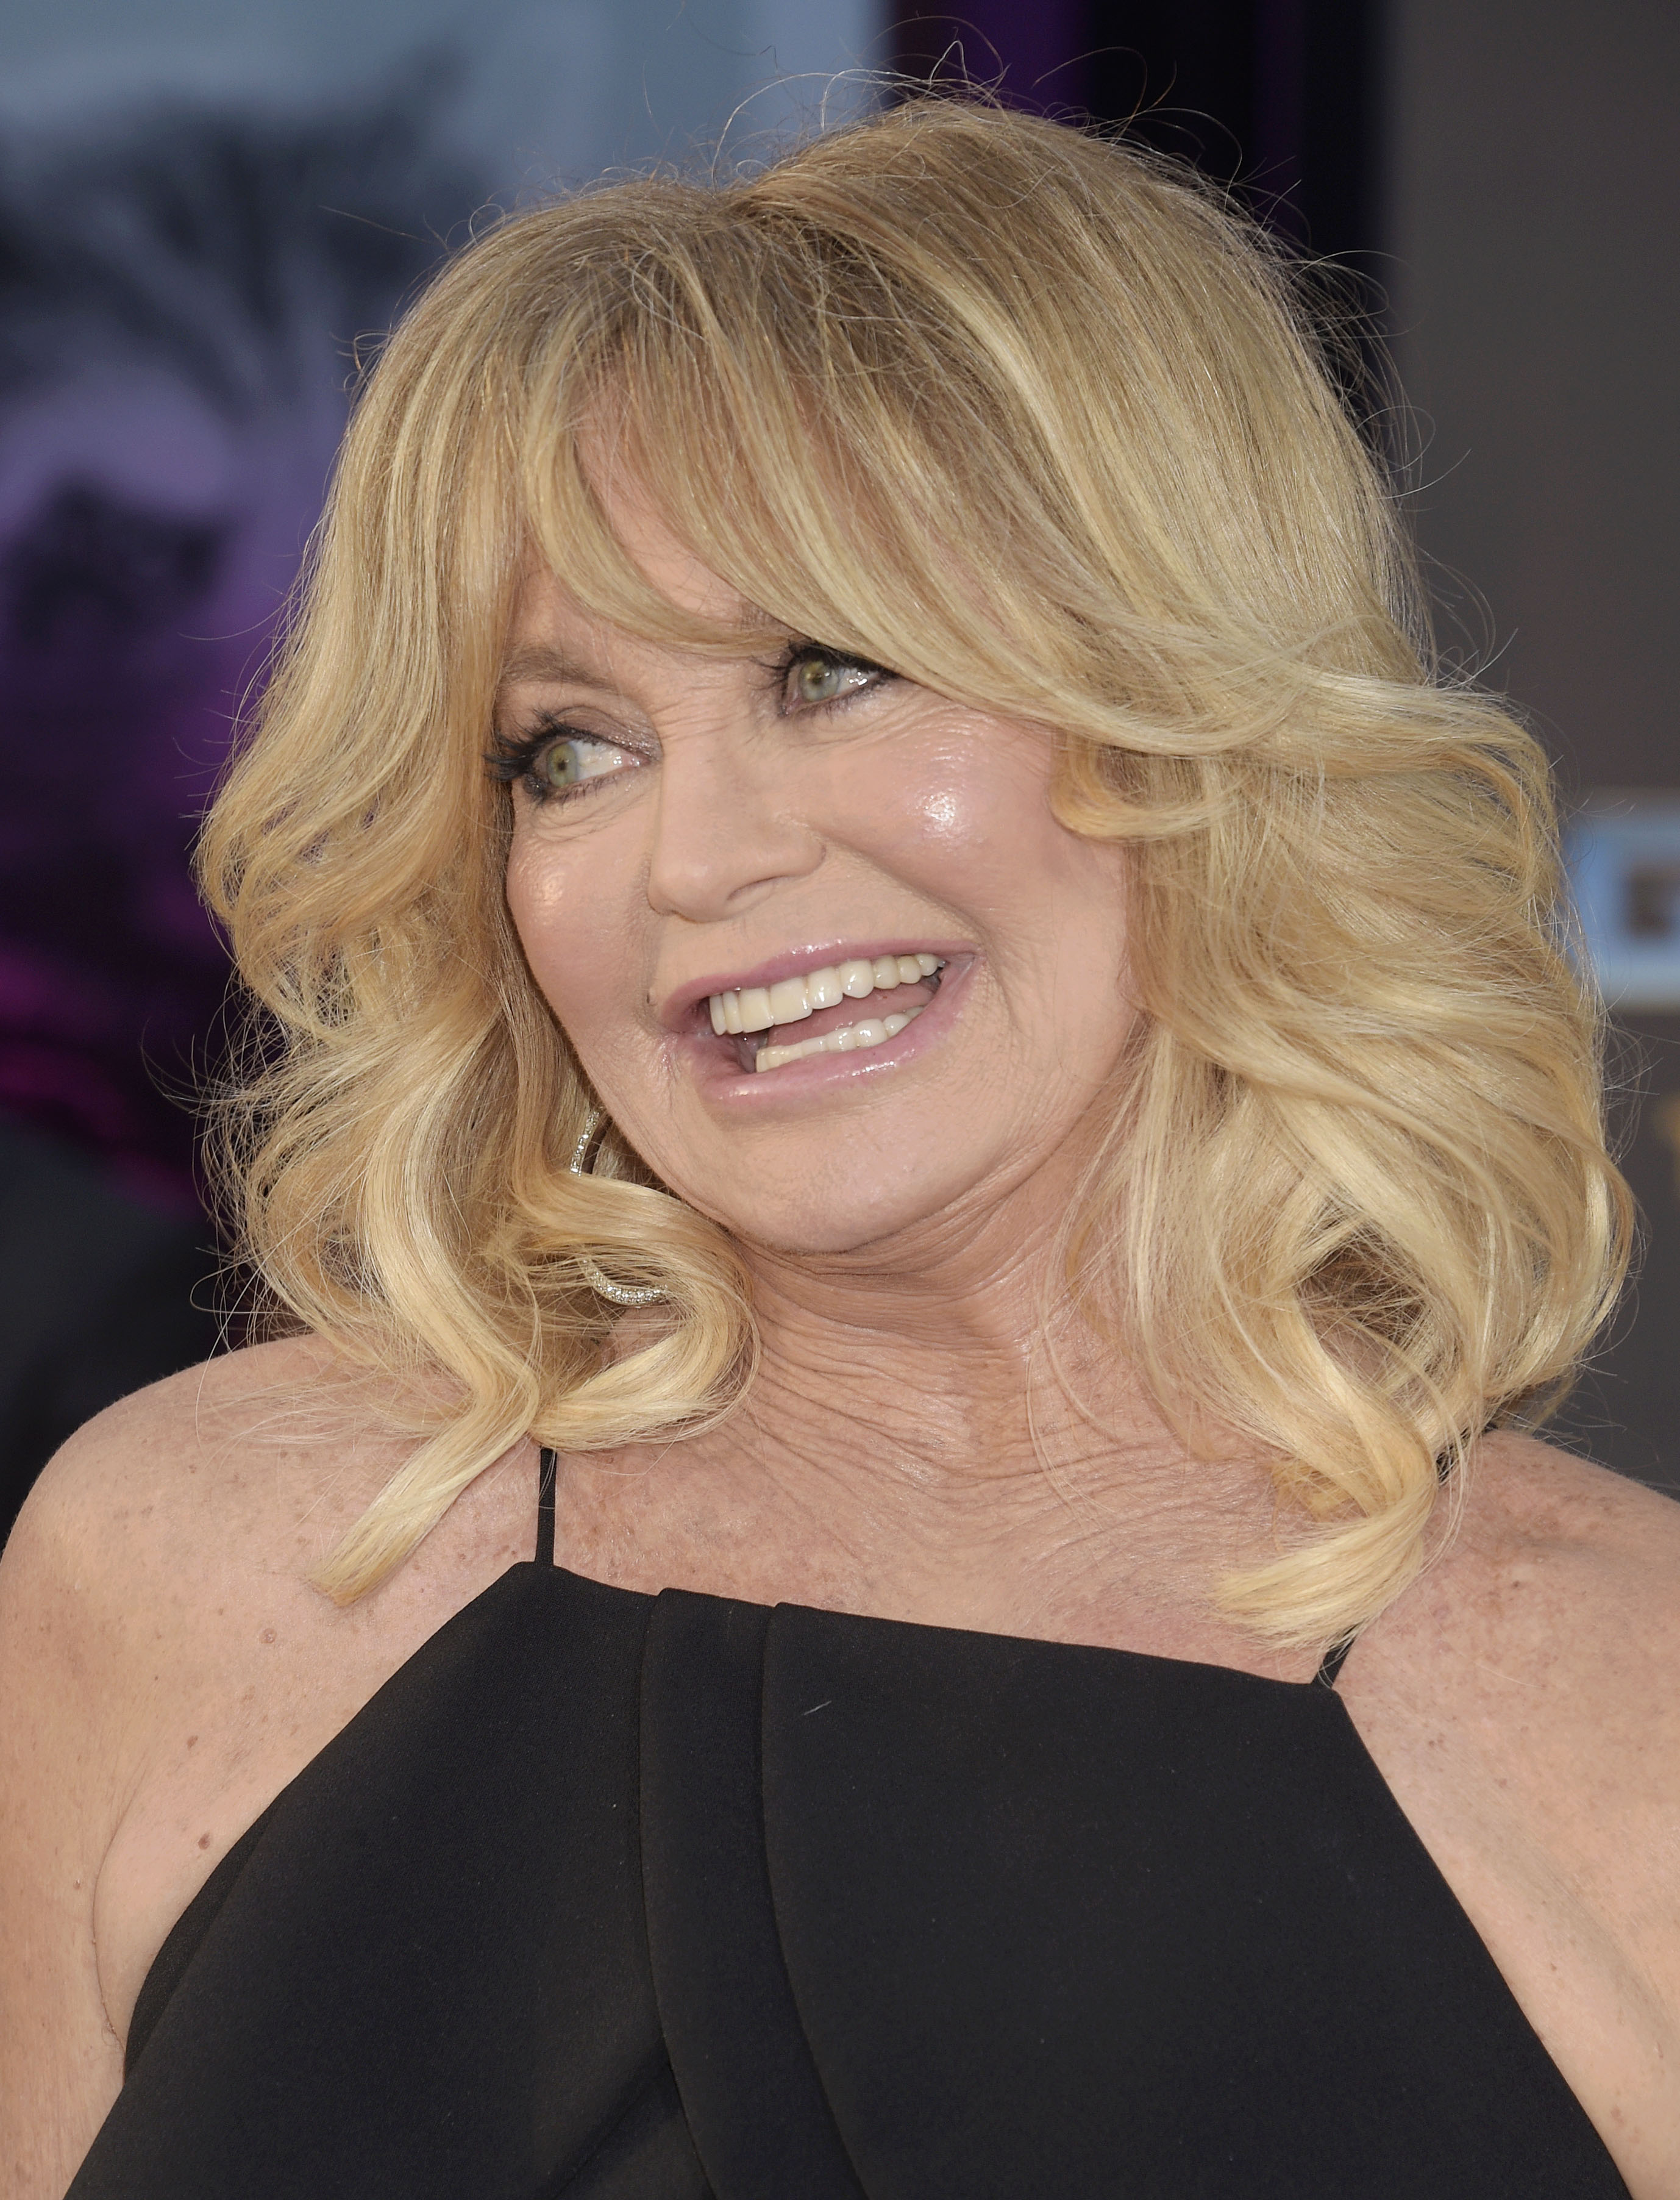 Goldie Hawn at the "Guardians Of The Galaxy Vol. 2" premiere in Hollywood, 2017 | Source: Getty Images